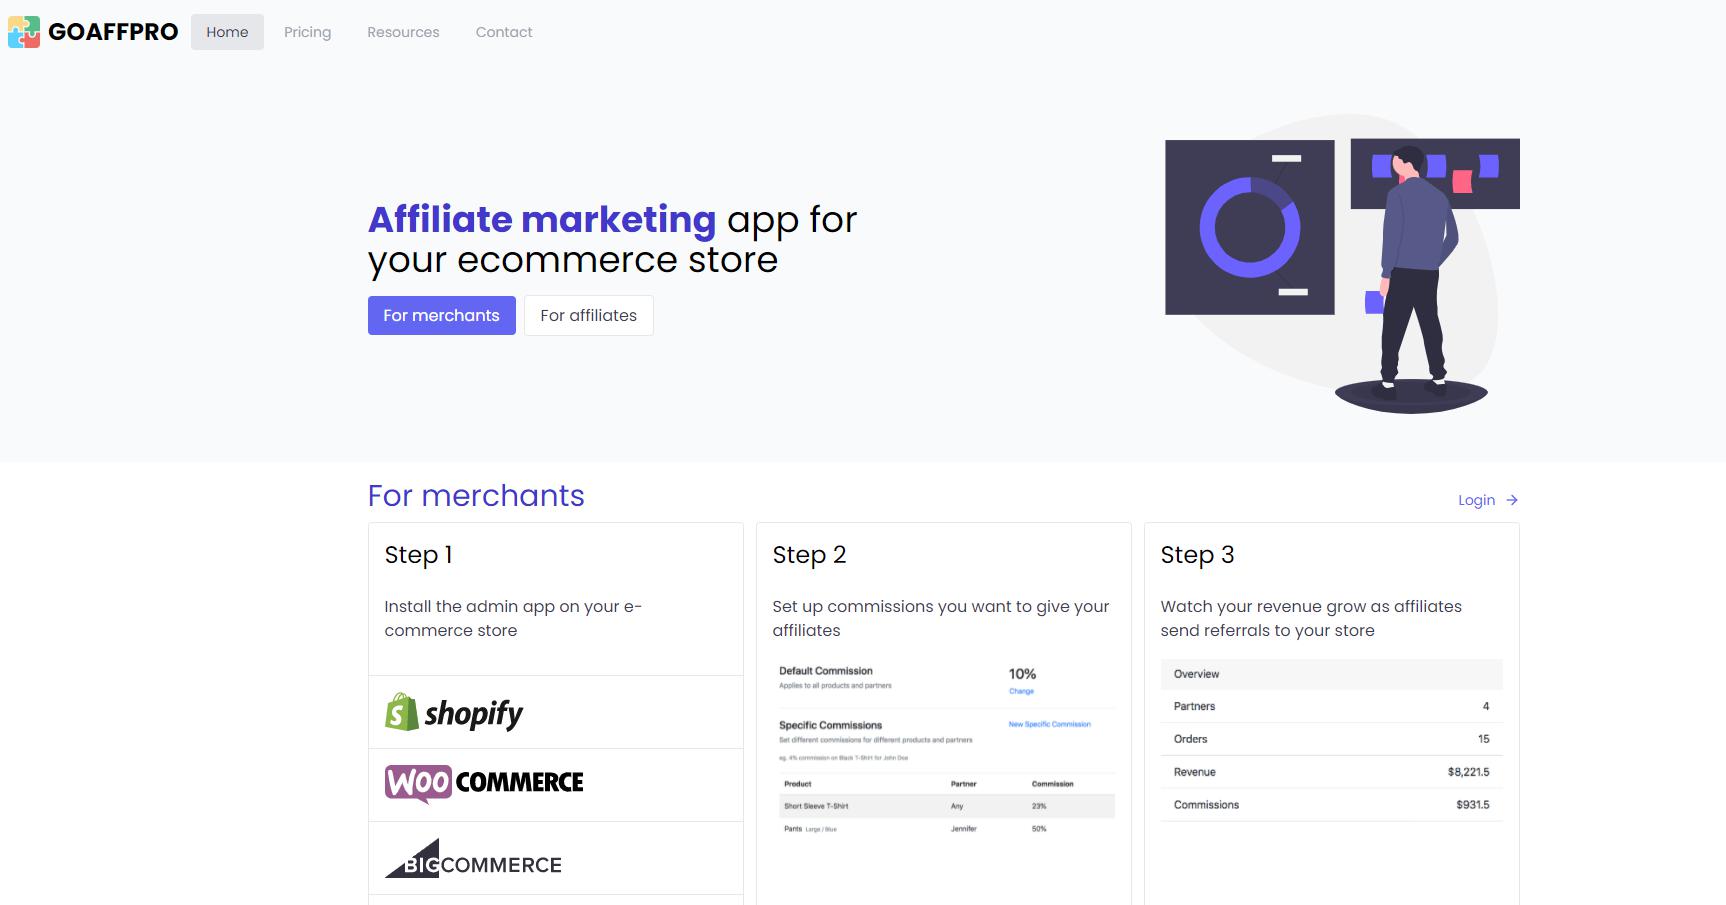 Ease of use, various functions & great scalability, Goaffpro is for sure one of the coolest Shopify Affiliate Apps in 2021